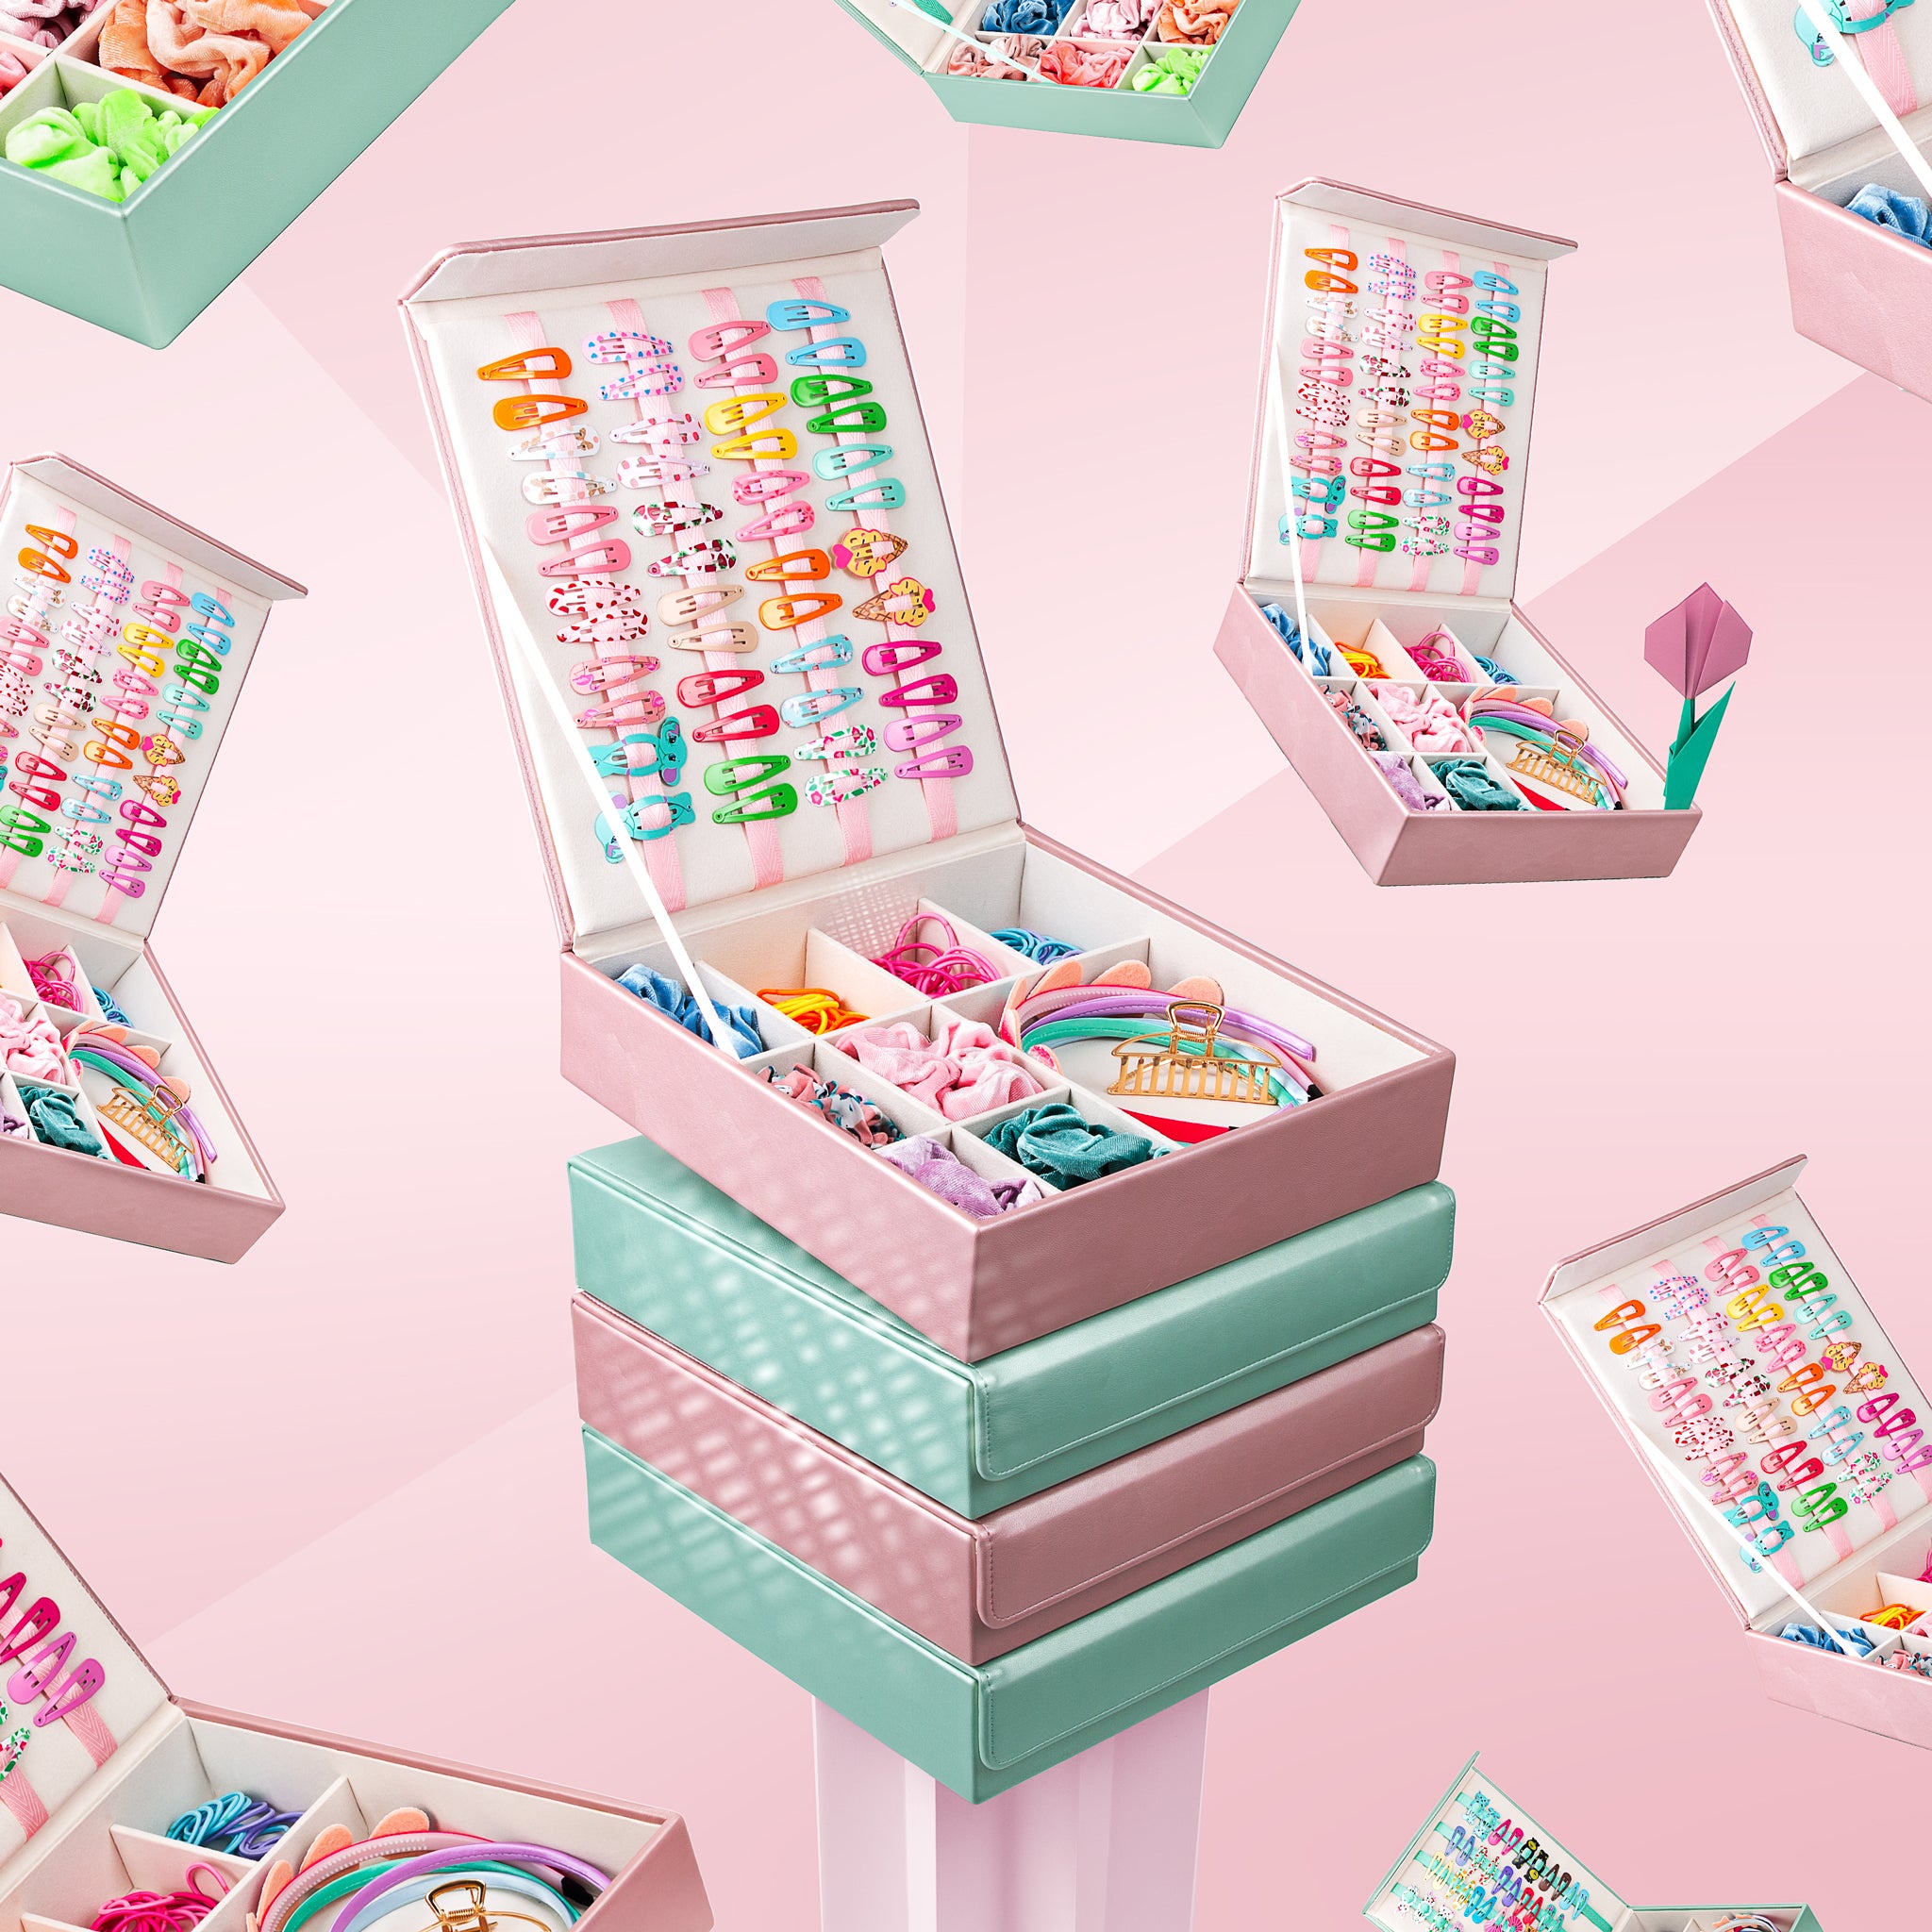 Fun image showing the mint green and pink hair accessory storage boxes stacked on top of one another, and surrounded by floating images. The background is pink